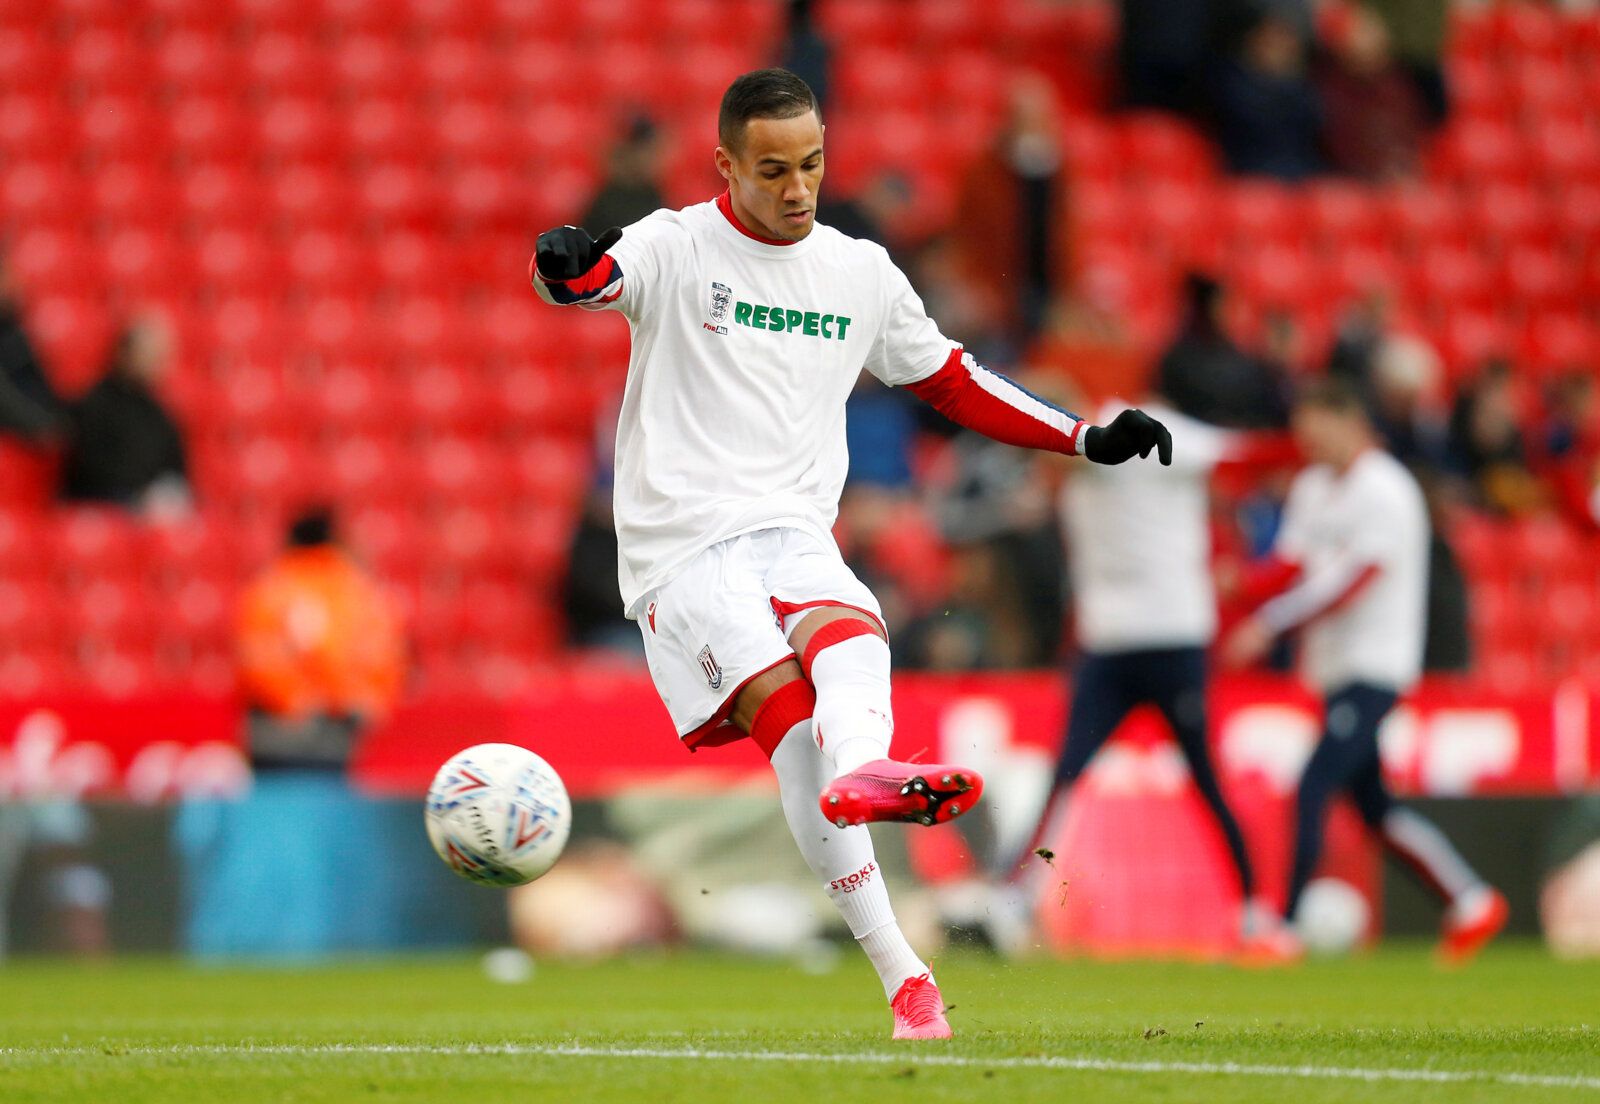 Soccer Football - Championship - Stoke City v Swansea City - bet365 Stadium, Stoke-on-Trent, Britain - January 25, 2020  Stoke City's Tom Ince during the warm up before the match   Action Images/Ed Sykes  EDITORIAL USE ONLY. No use with unauthorized audio, video, data, fixture lists, club/league logos or 